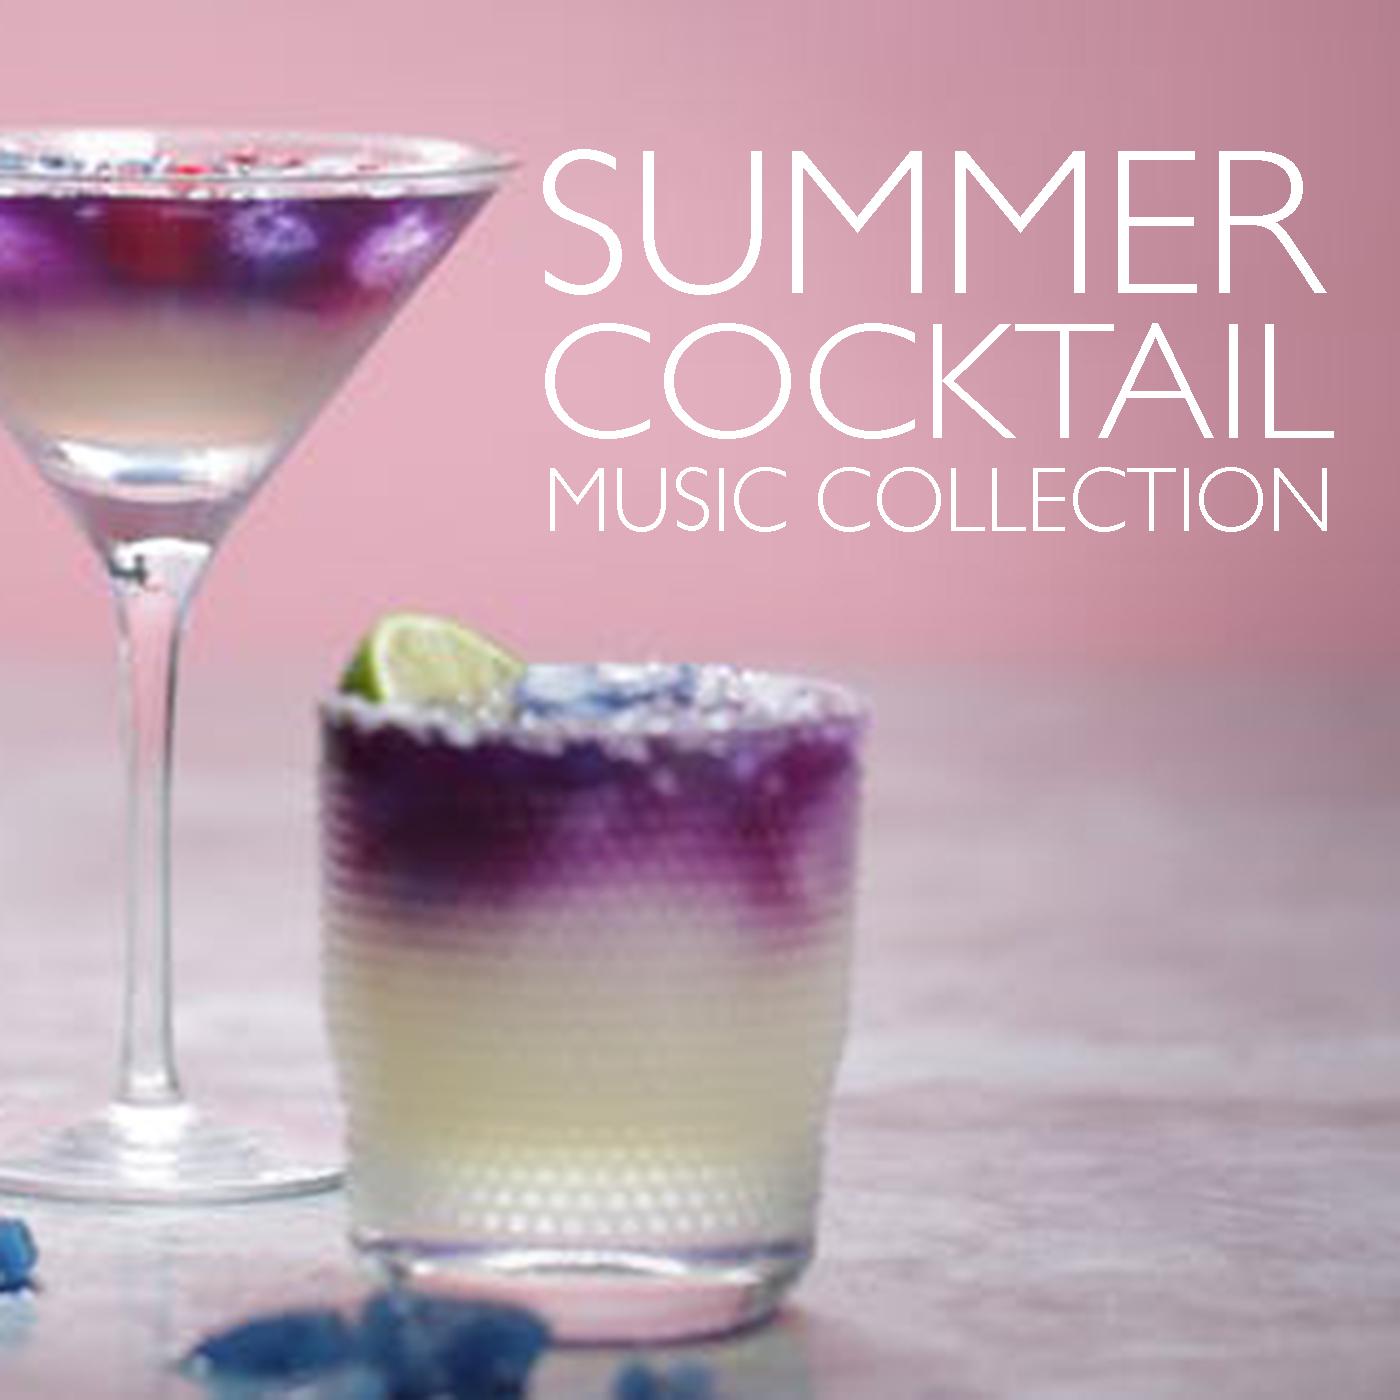 Summer Cocktail Music Collection